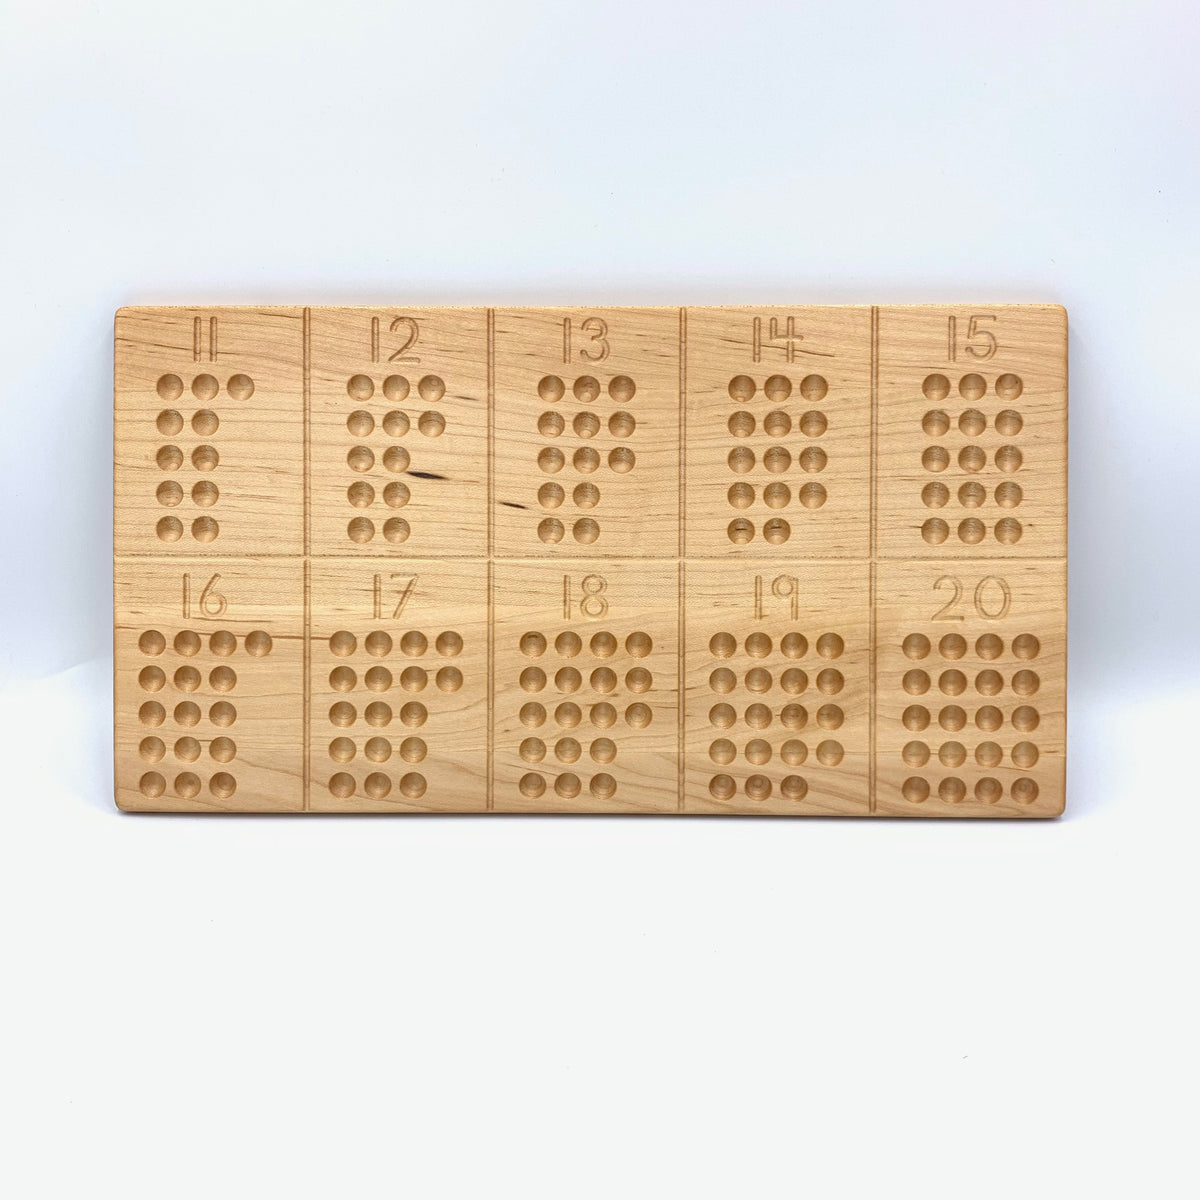 11-20 Counting Board with Wool Balls